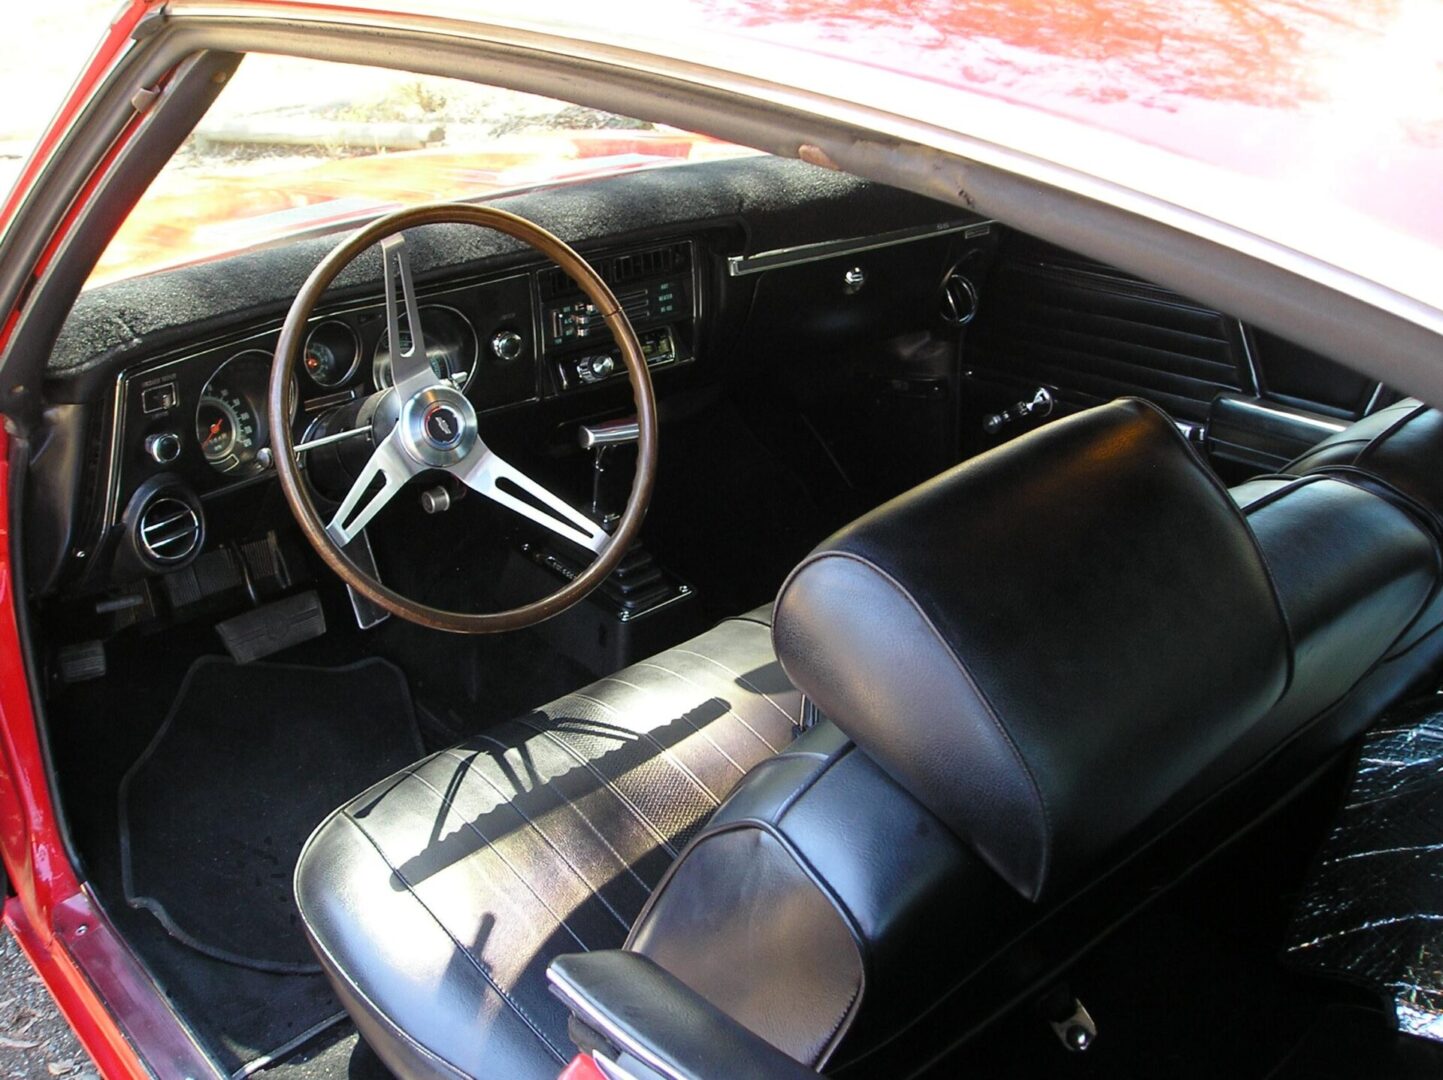 The interior of a red car.